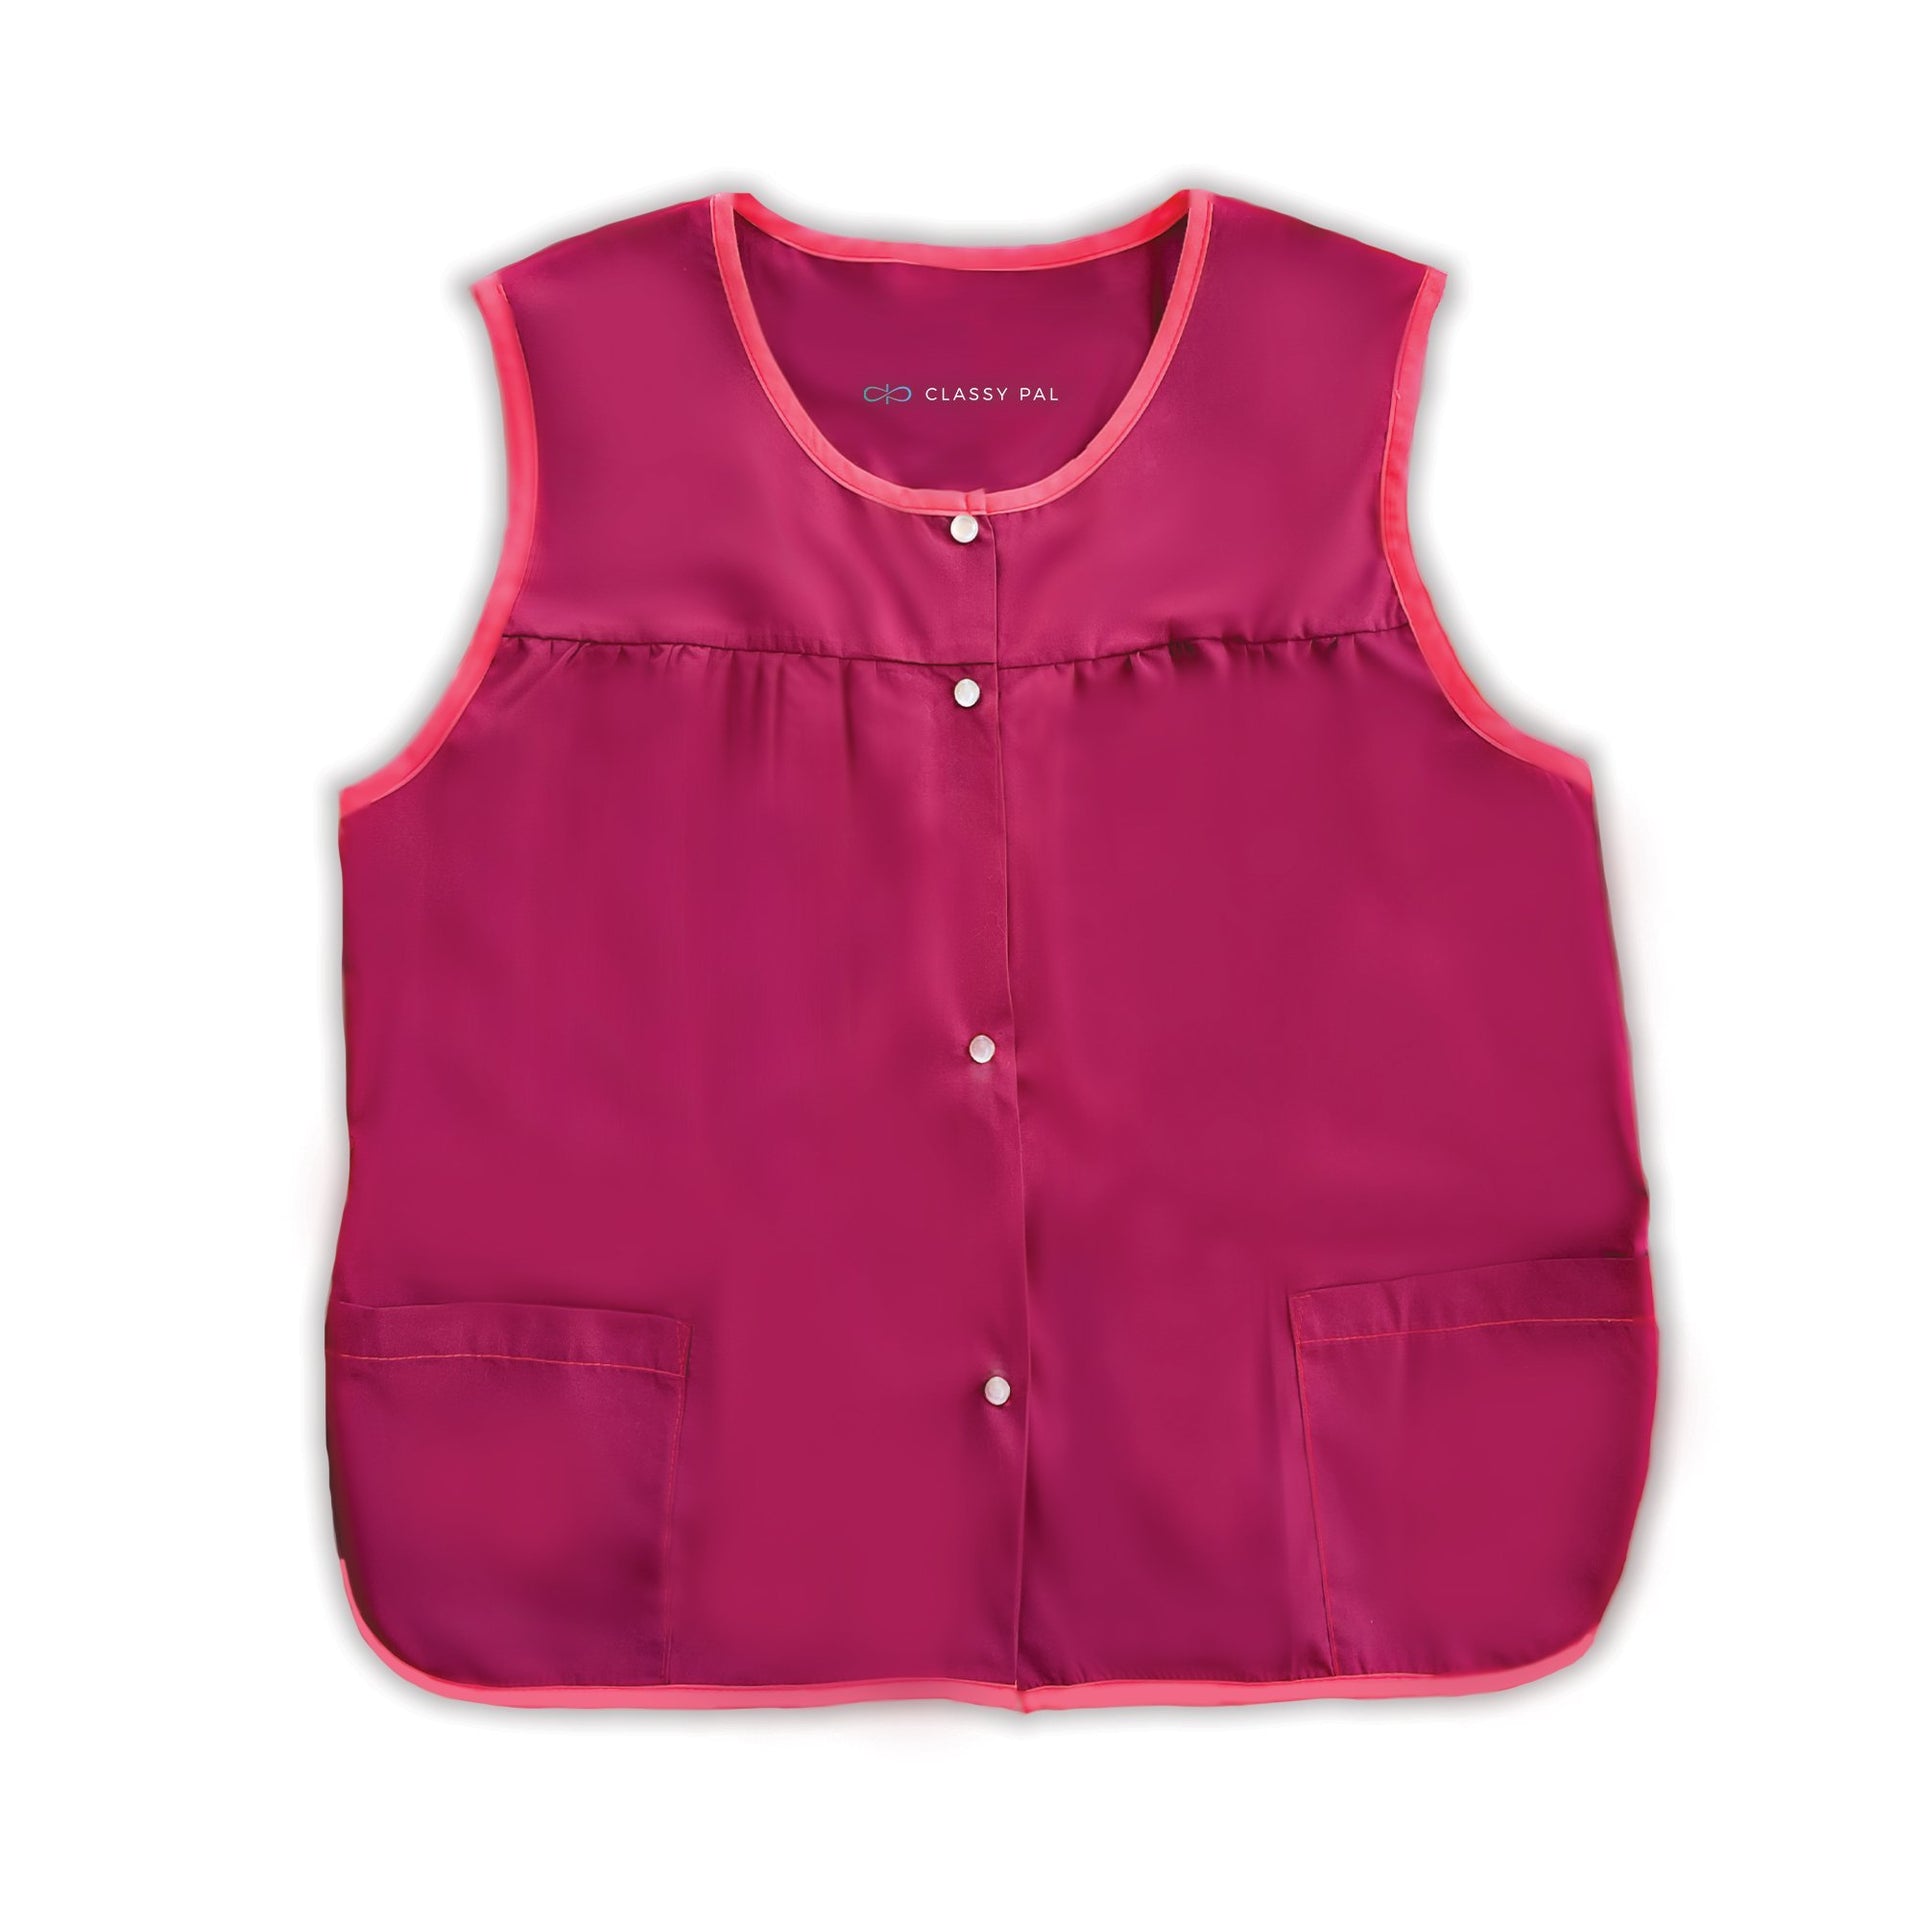 Women's Snap Front Smock Apron with Pockets (Burgundy)